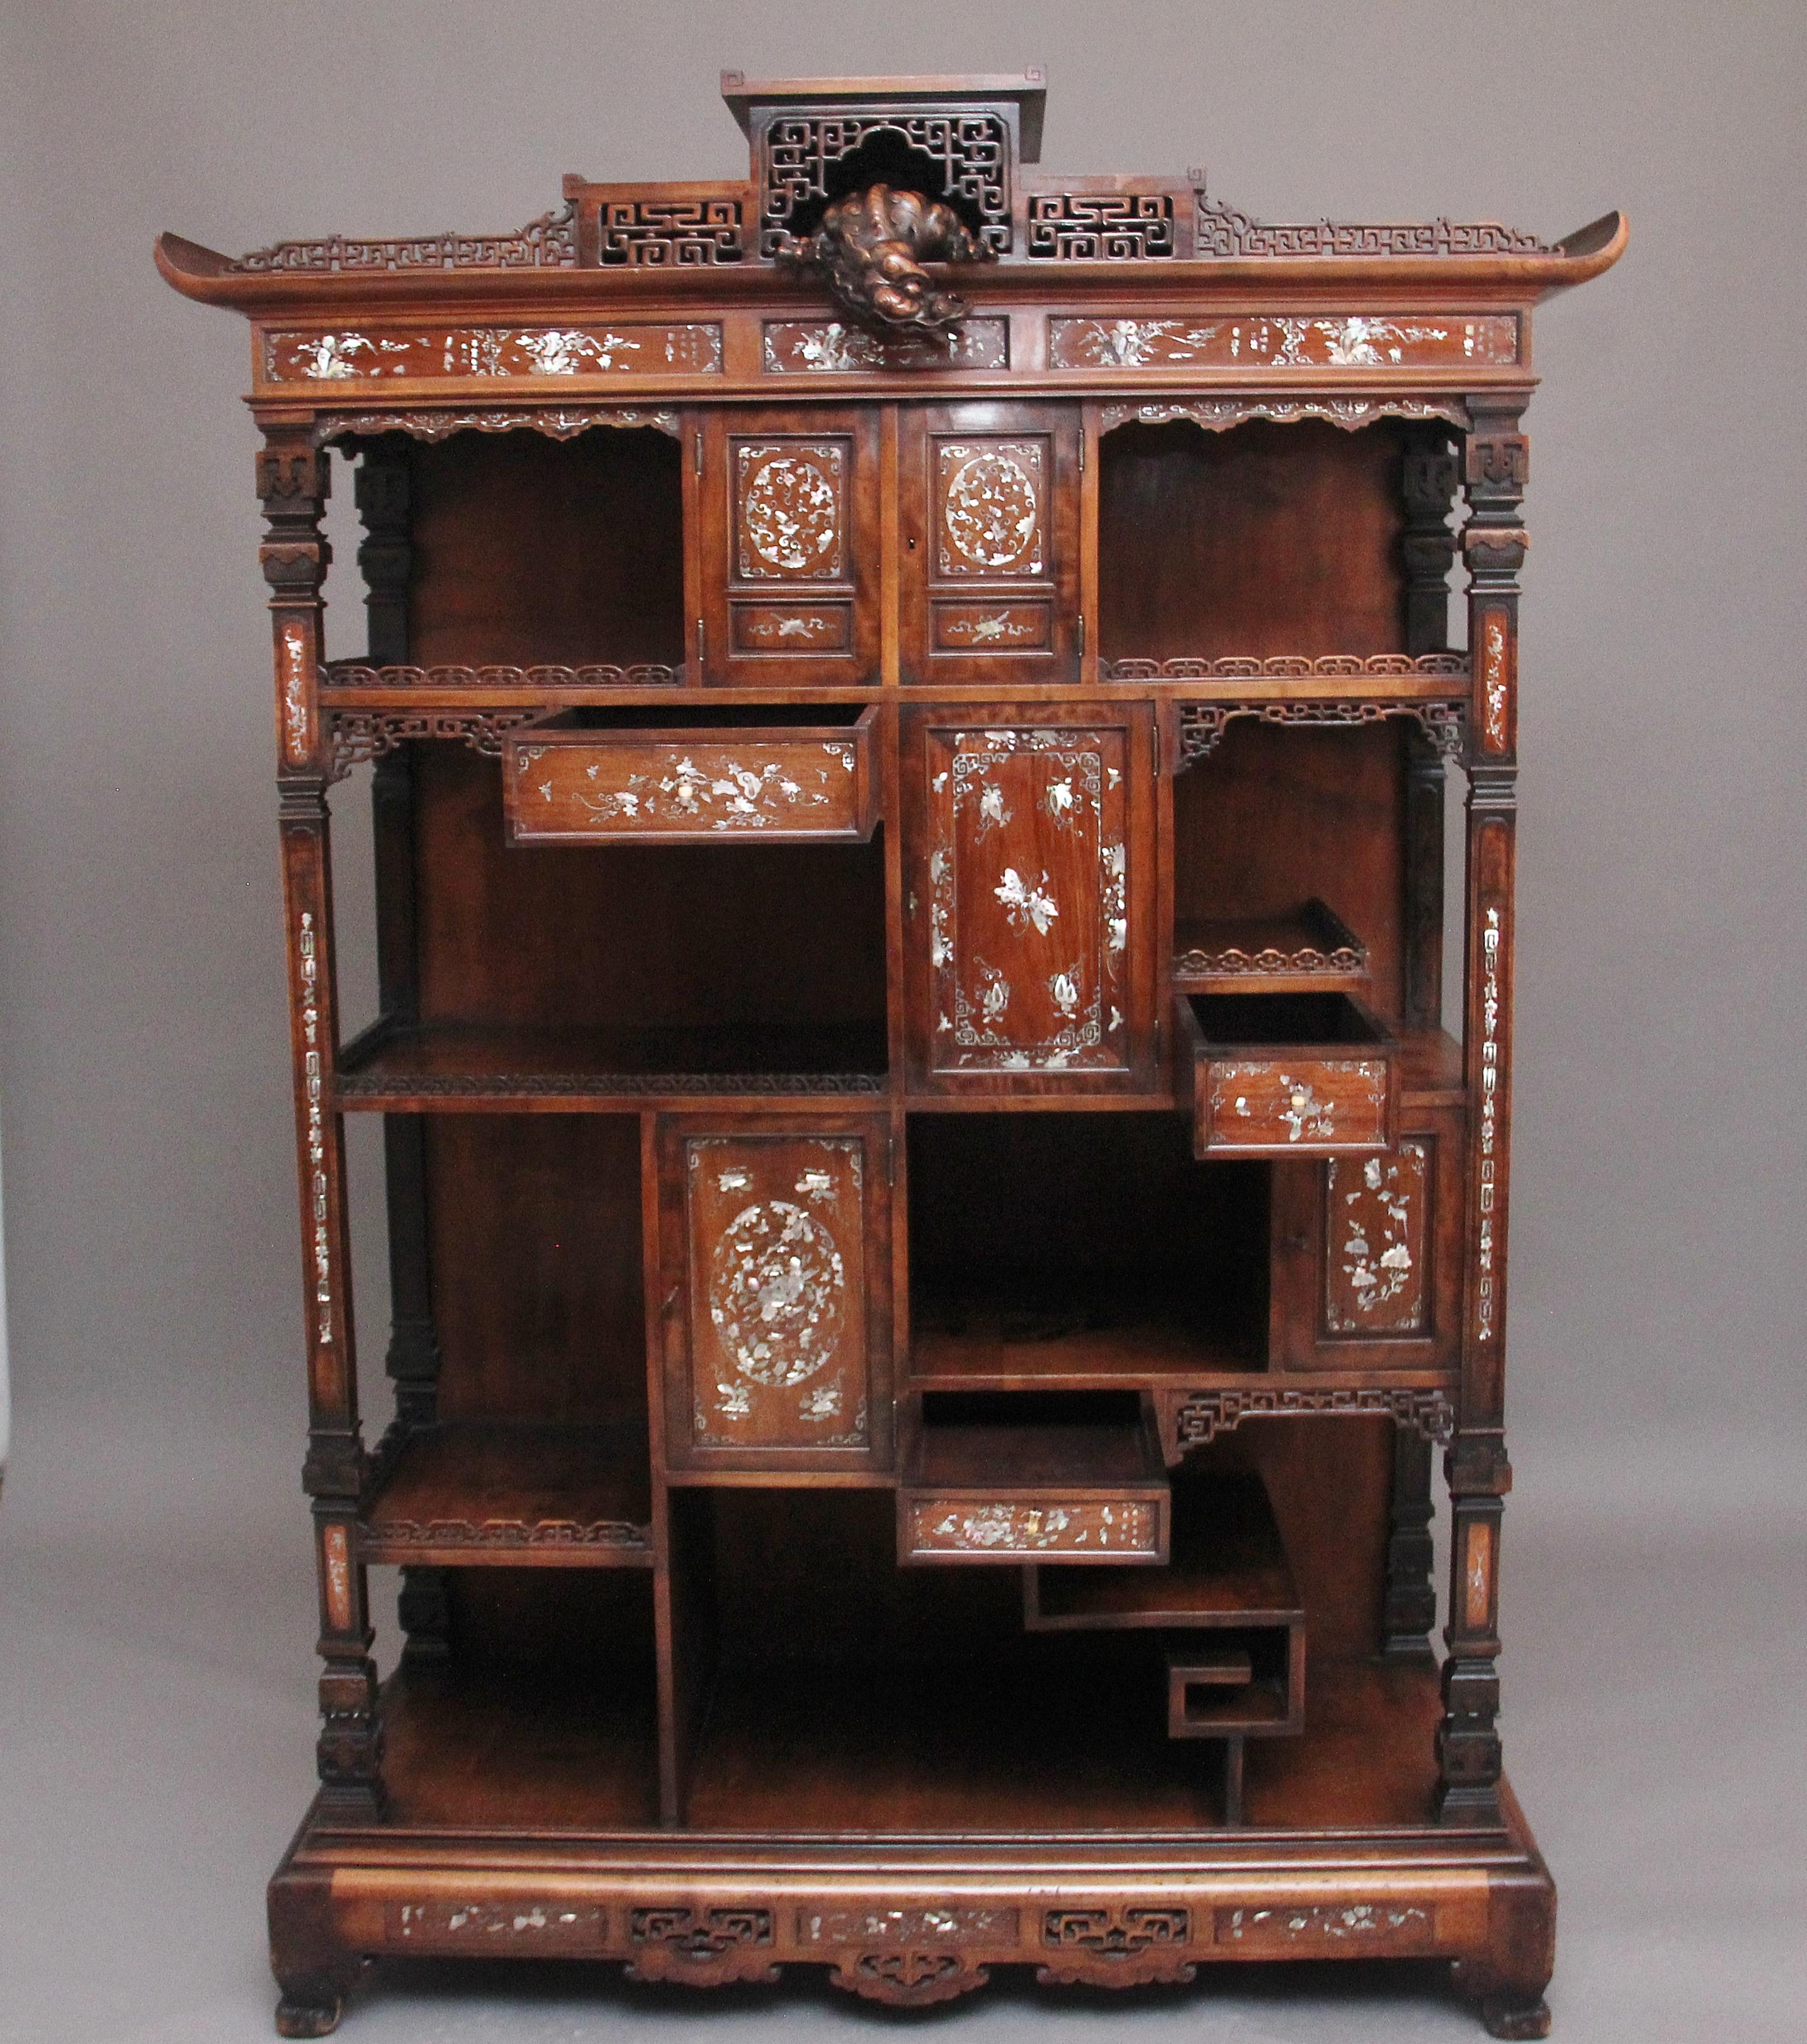 Fabulous Quality 19th Century French Japanese Style Shodona In Good Condition For Sale In Martlesham, GB